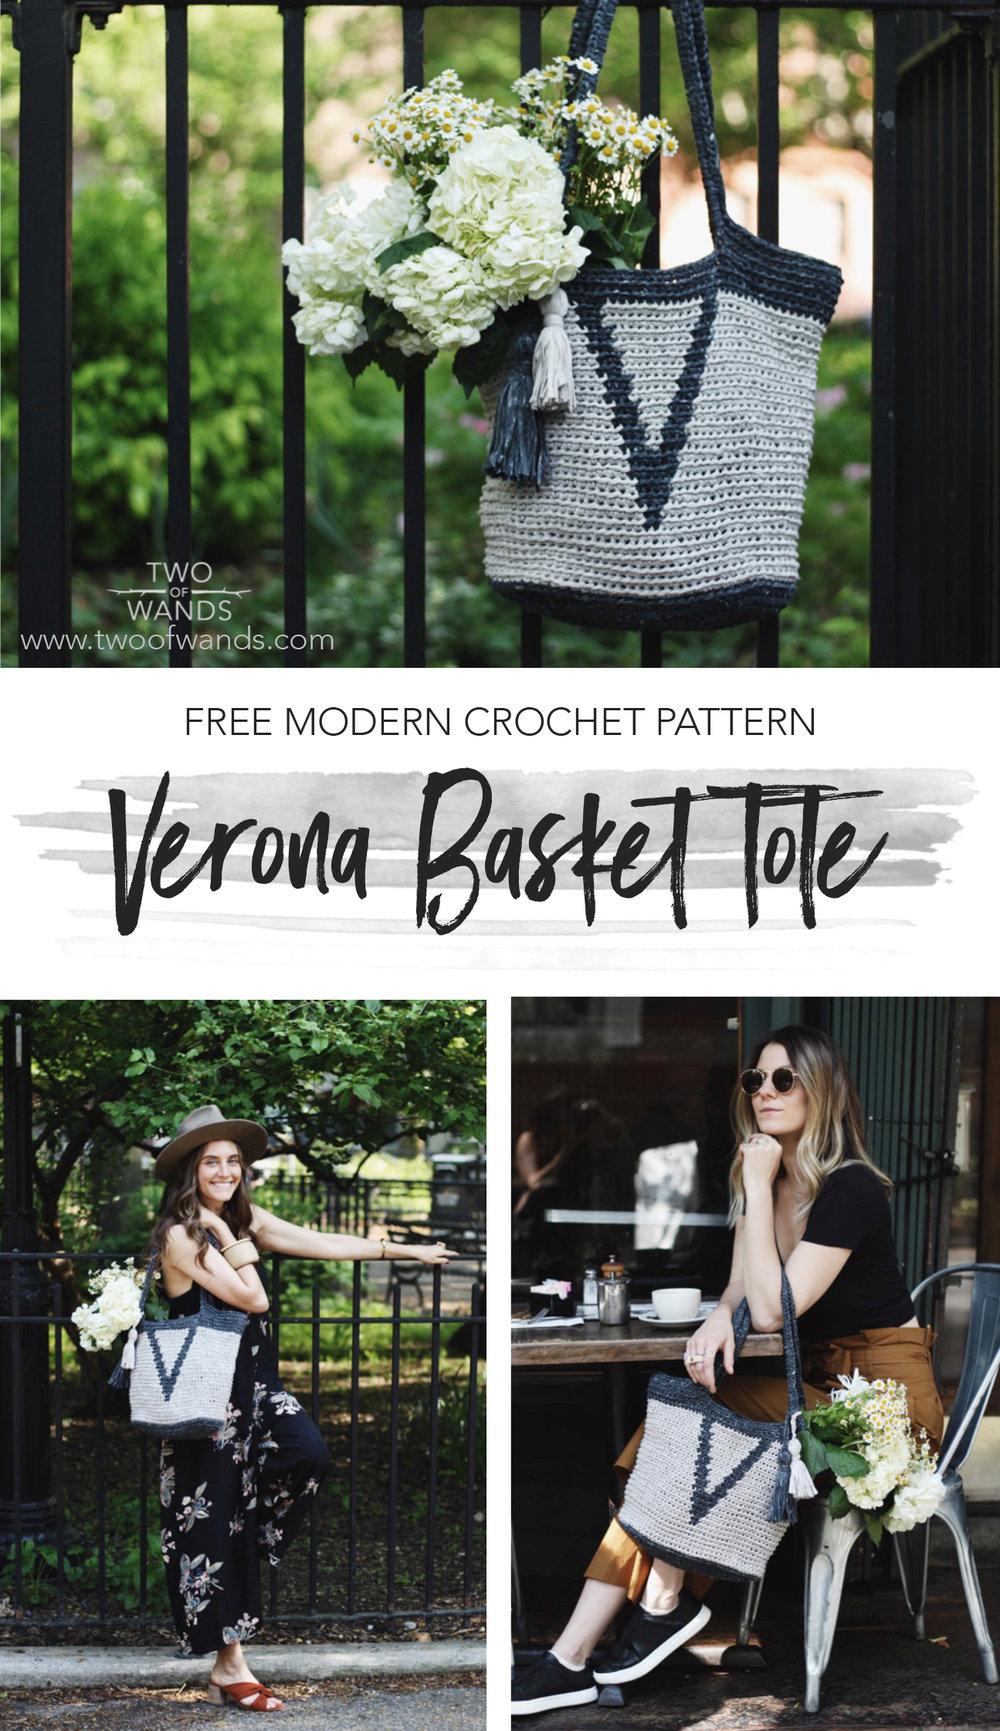 Verona Basket Tote pattern by Two of Wands